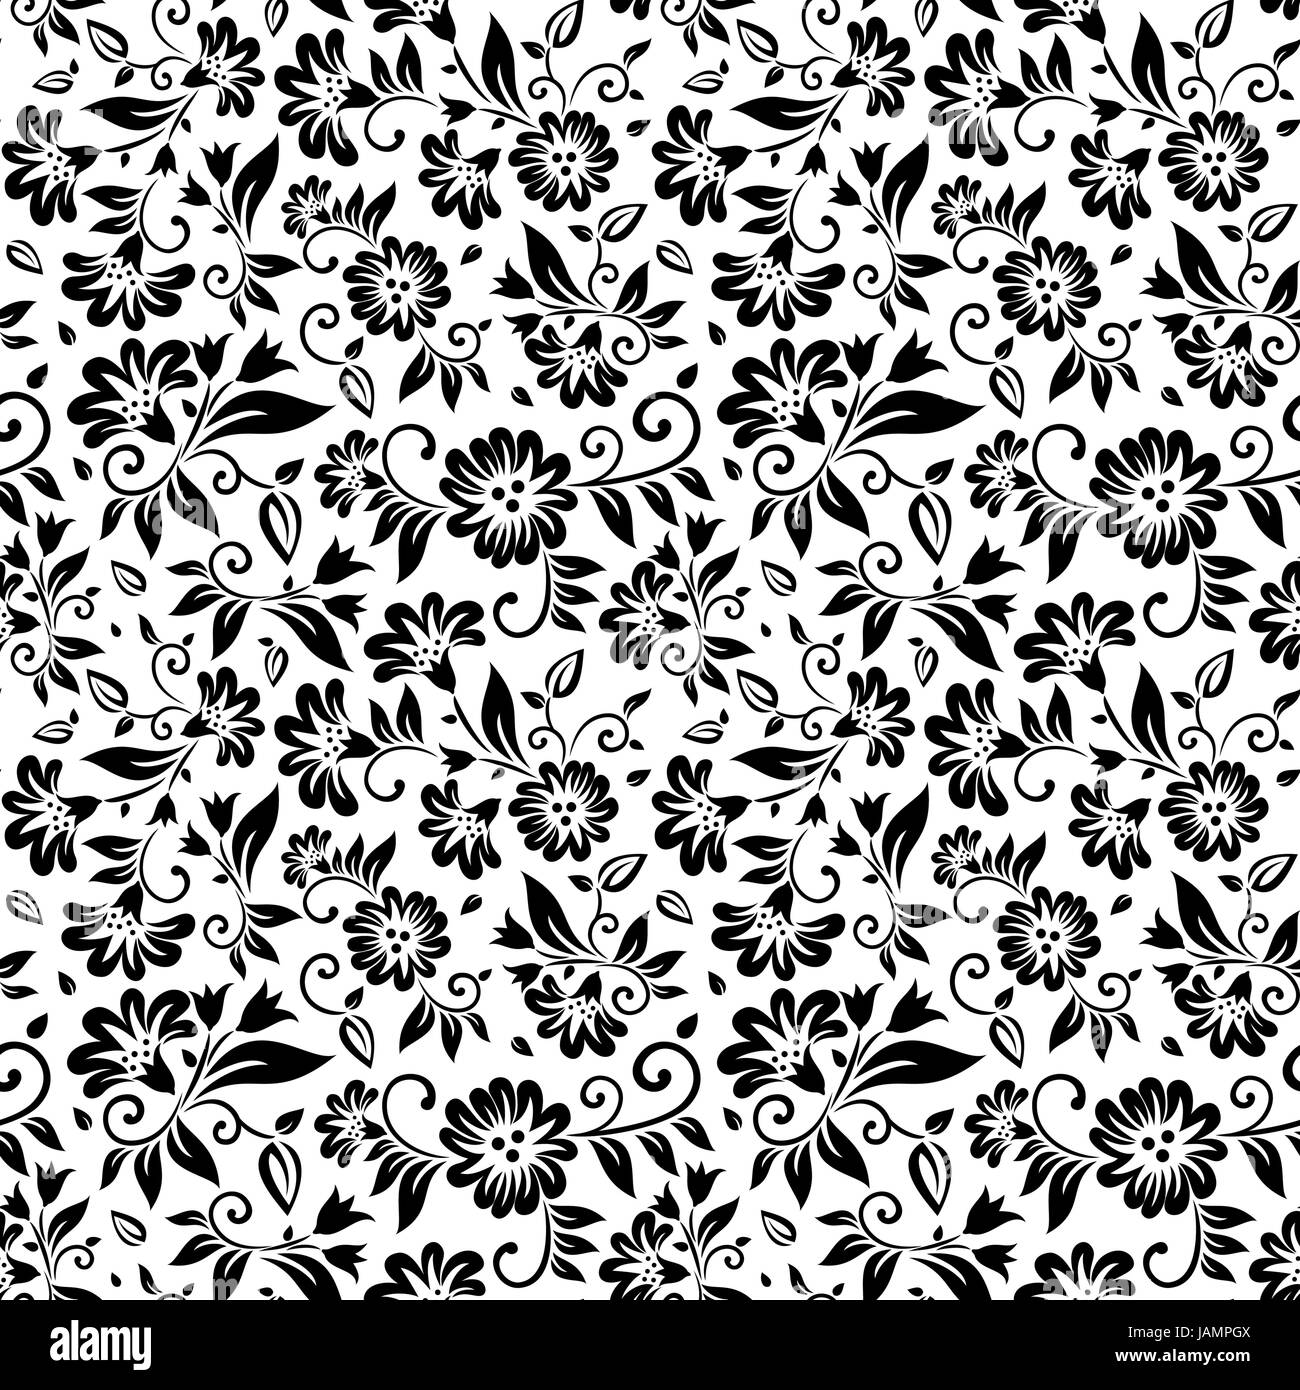 floral seamless pattern in black and white with leaves and flower ...